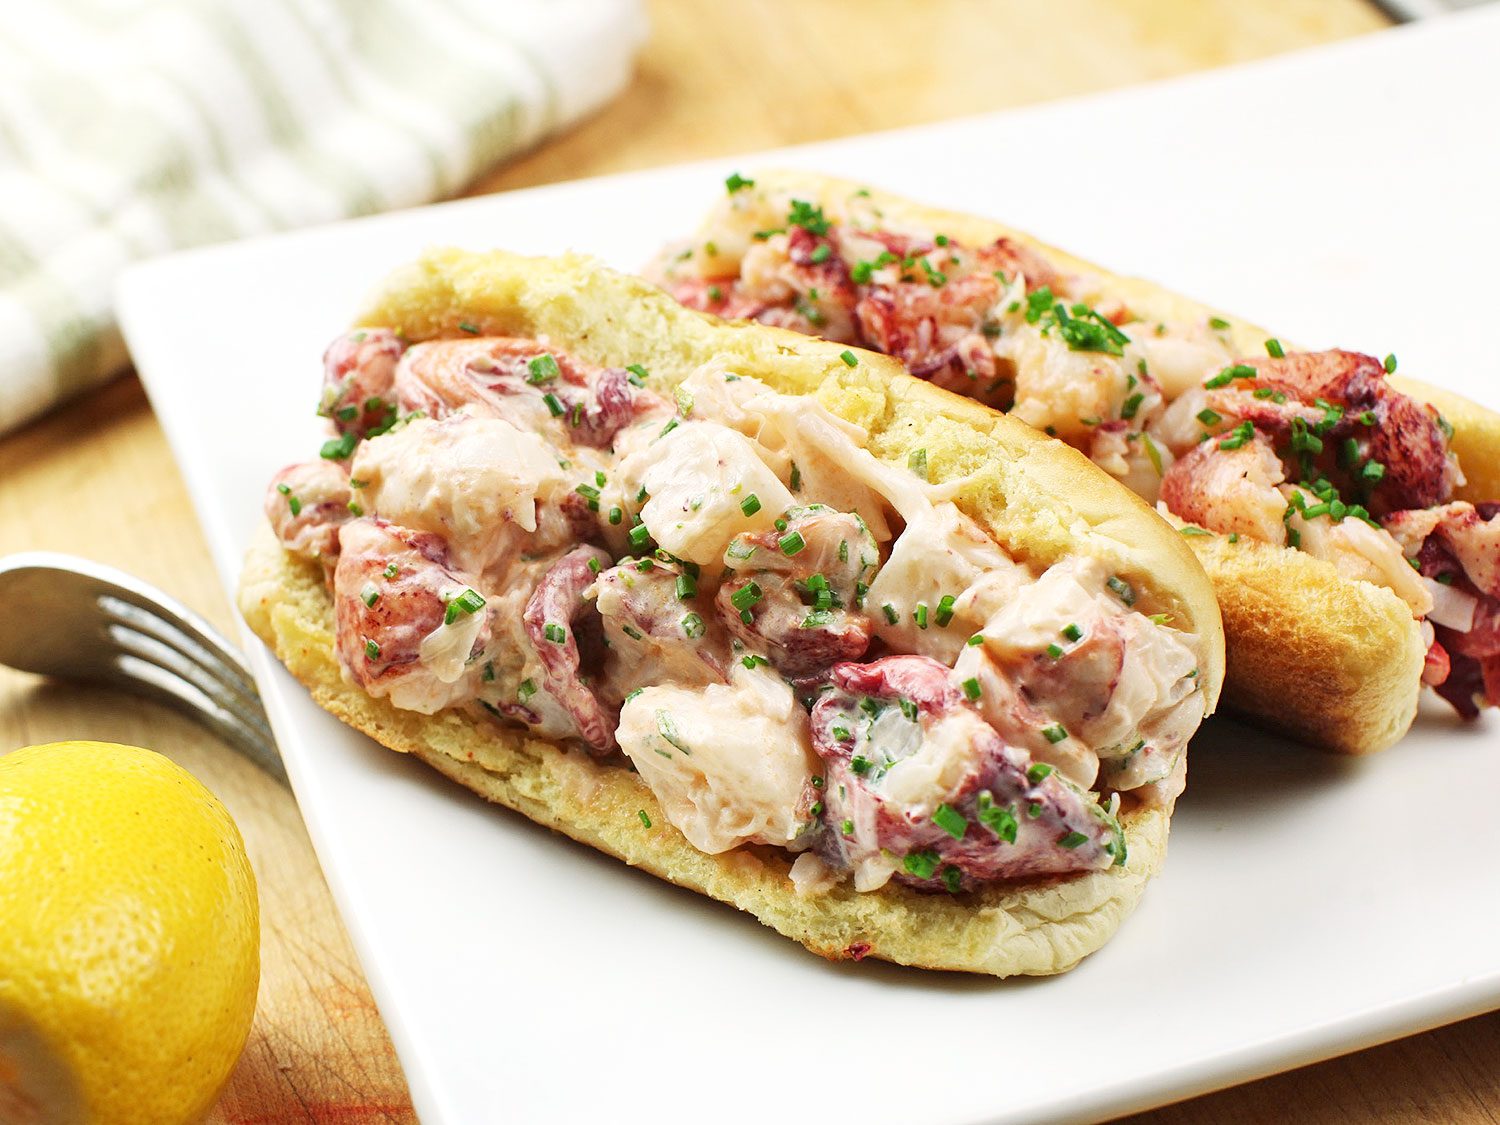 Say Yum Or Yuck to Seafood Dishes to Know How Picky You… Quiz Lobster Roll